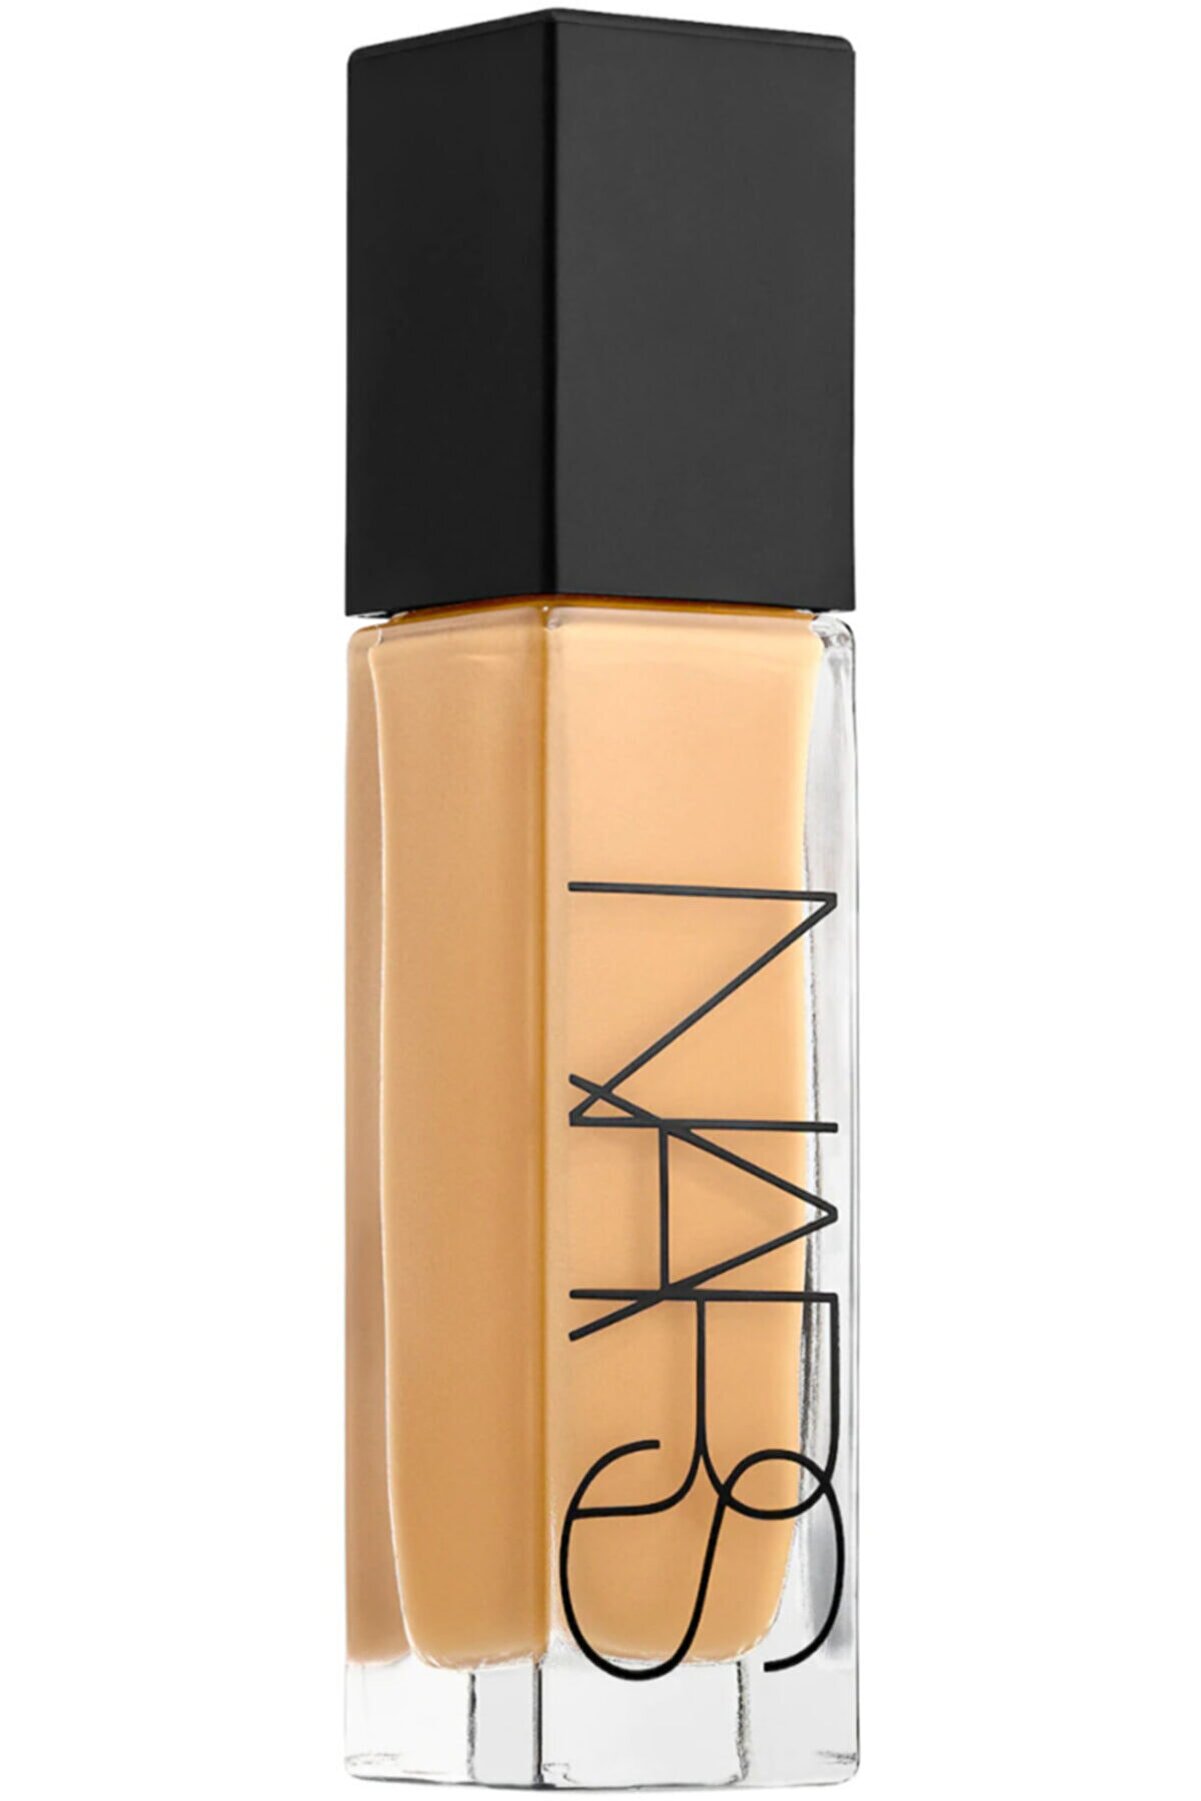 Nars Natural Radiant Longwear Foundation Deauville SHİNE158